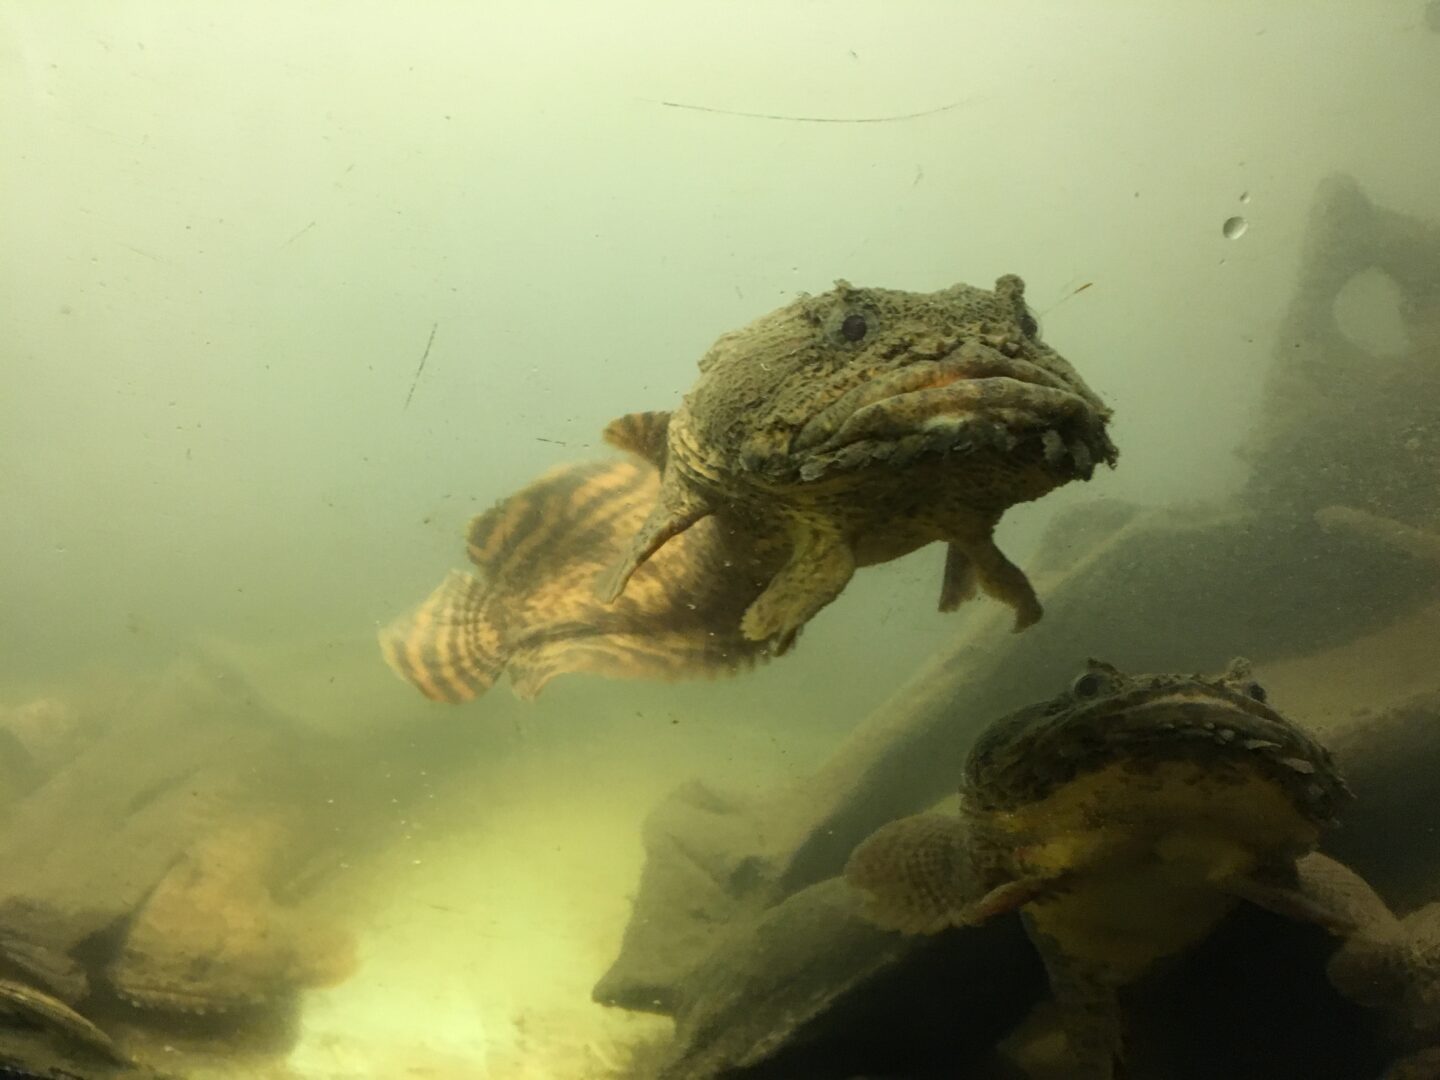 Swimming towards the Wetlab visitors, the Oyster Toadfish stares